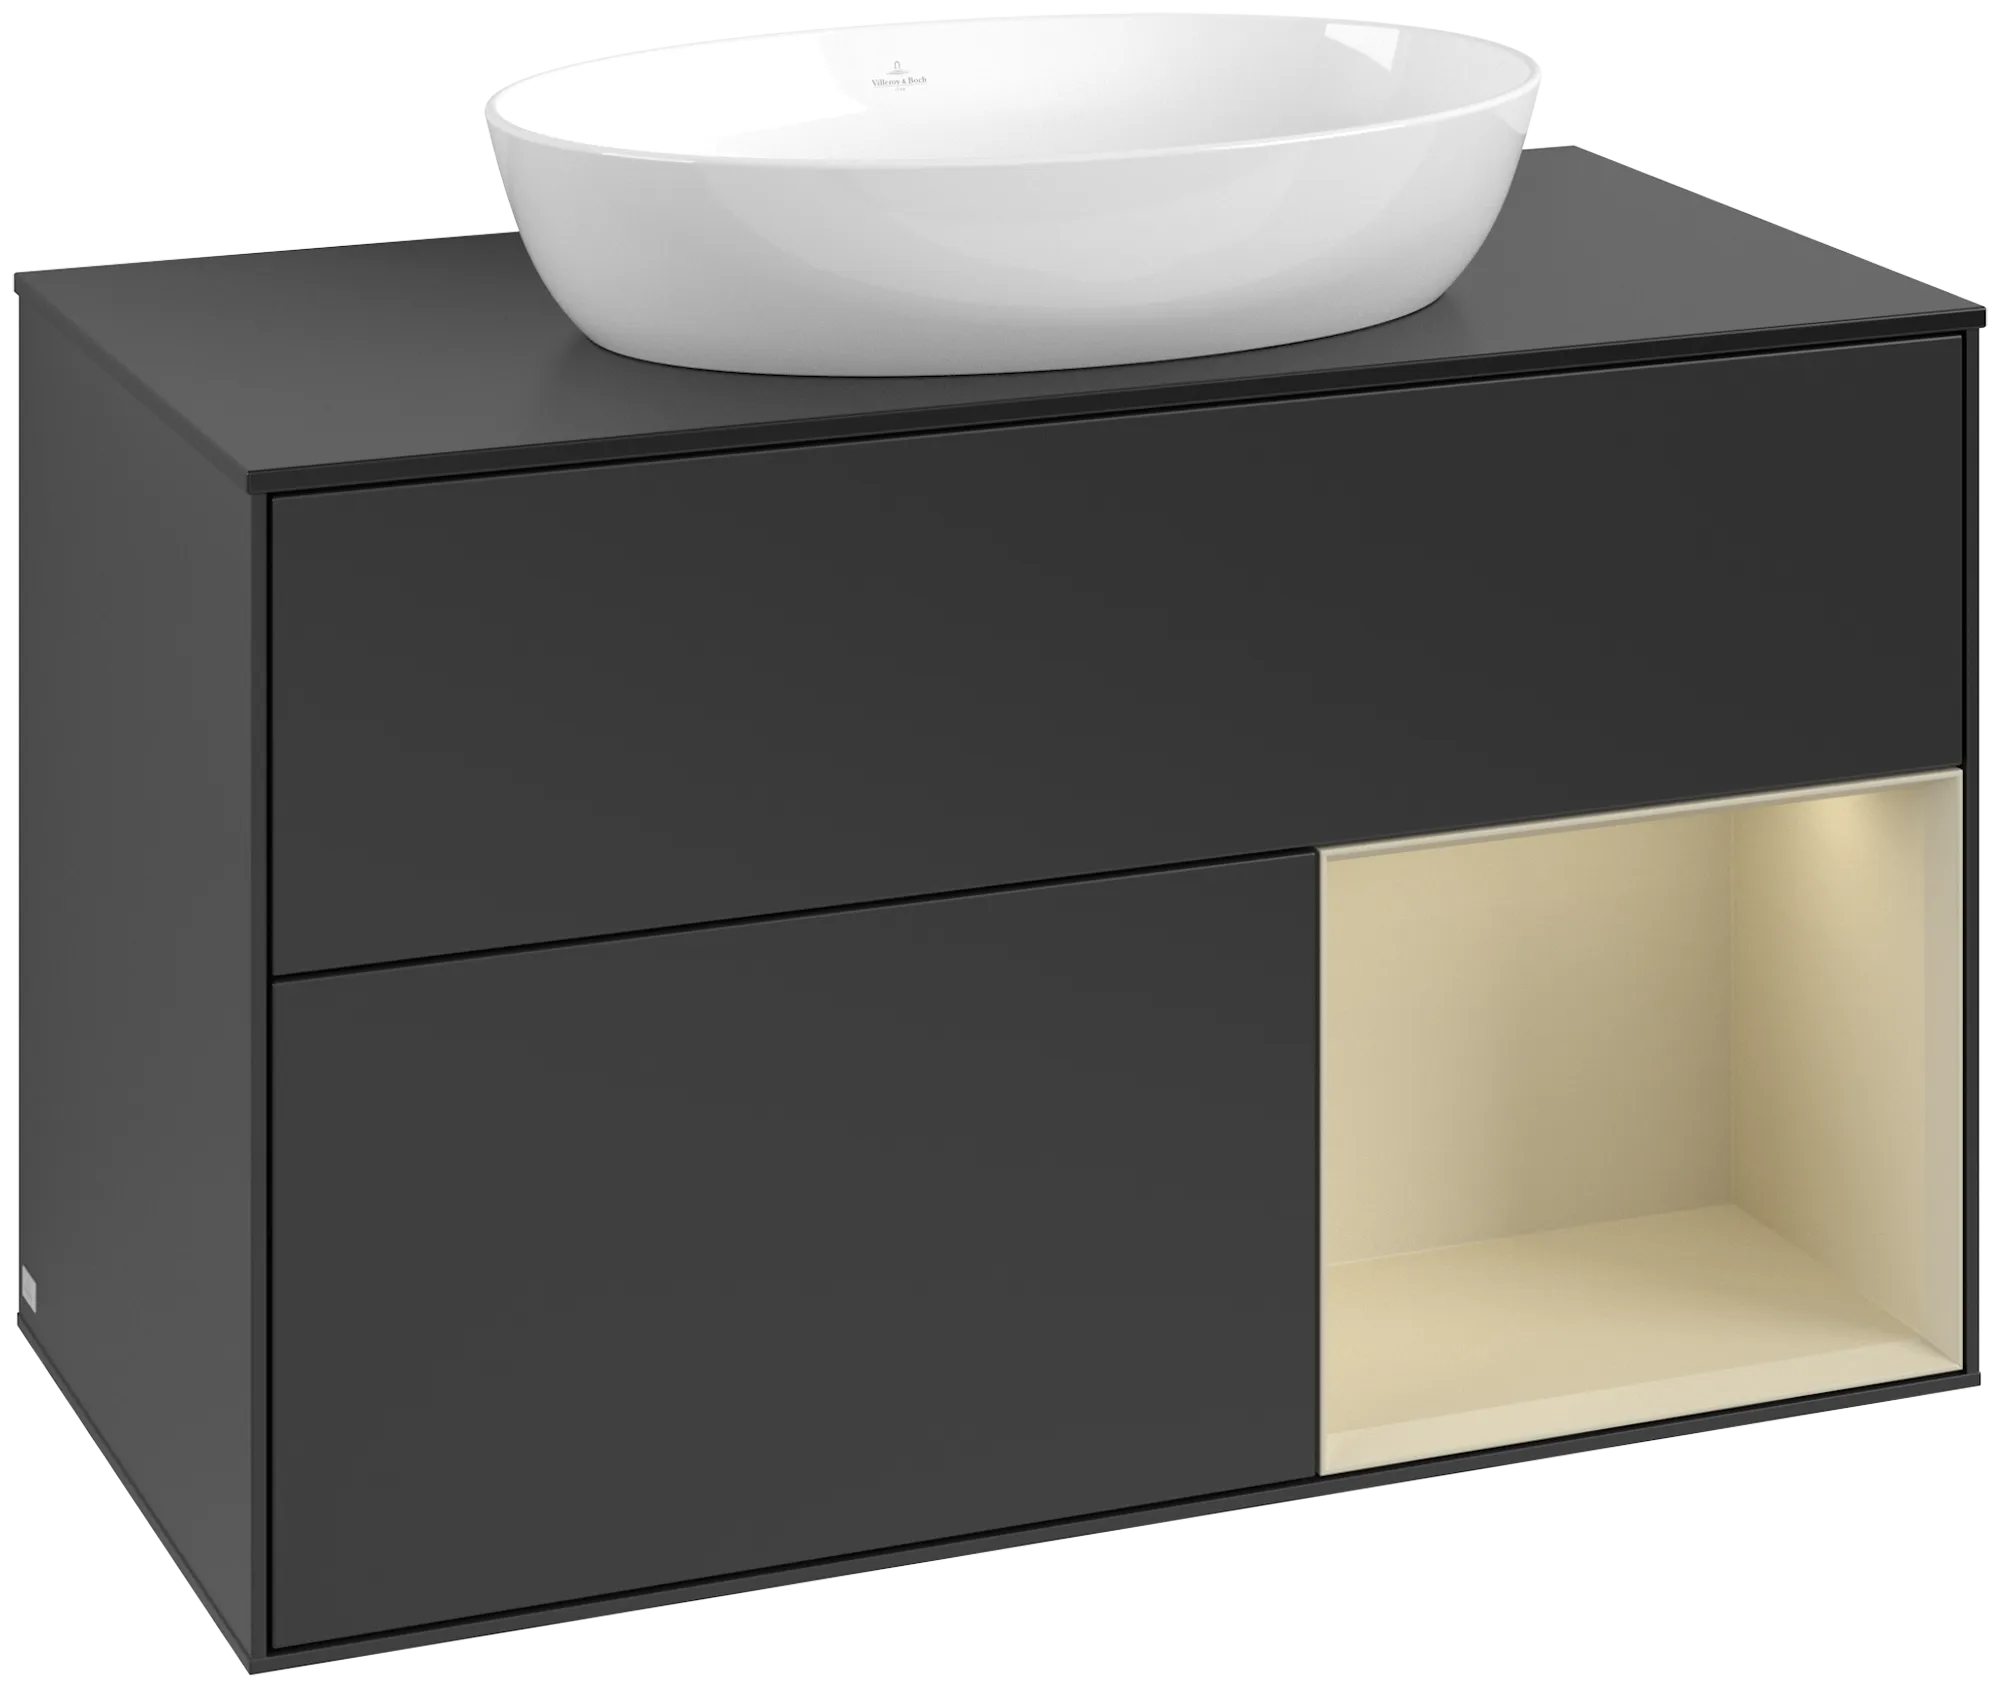 VILLEROY BOCH Finion Vanity unit, with lighting, 2 pull-out compartments, 1000 x 603 x 501 mm, Black Matt Lacquer / Silk Grey Matt Lacquer / Glass Black Matt #GA22HJPD resmi